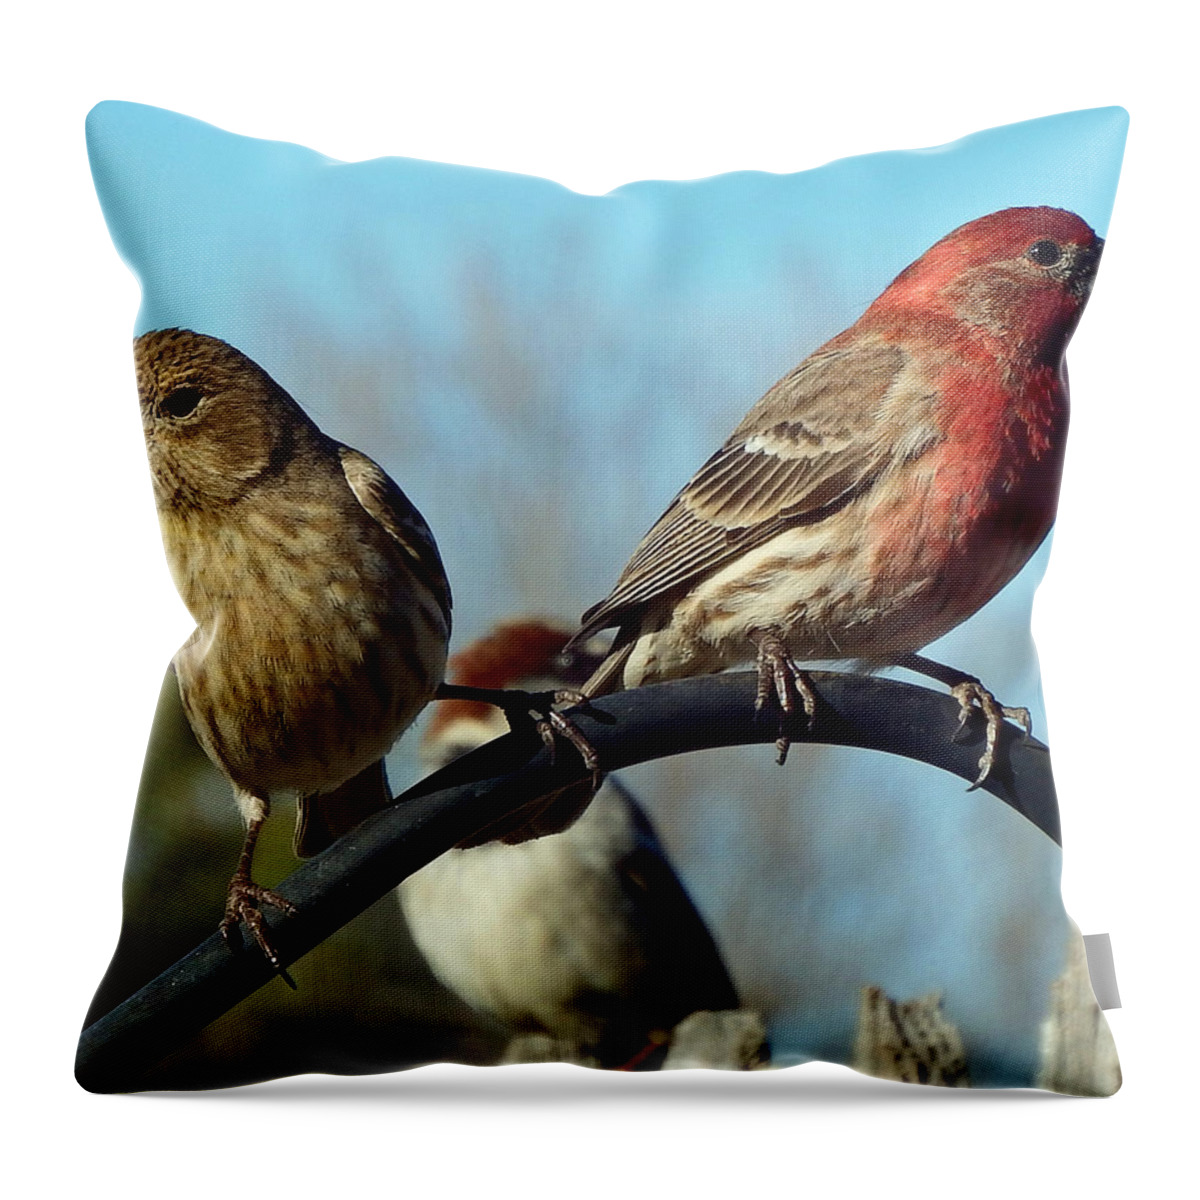 Male Throw Pillow featuring the photograph House Finch Pair by David G Paul